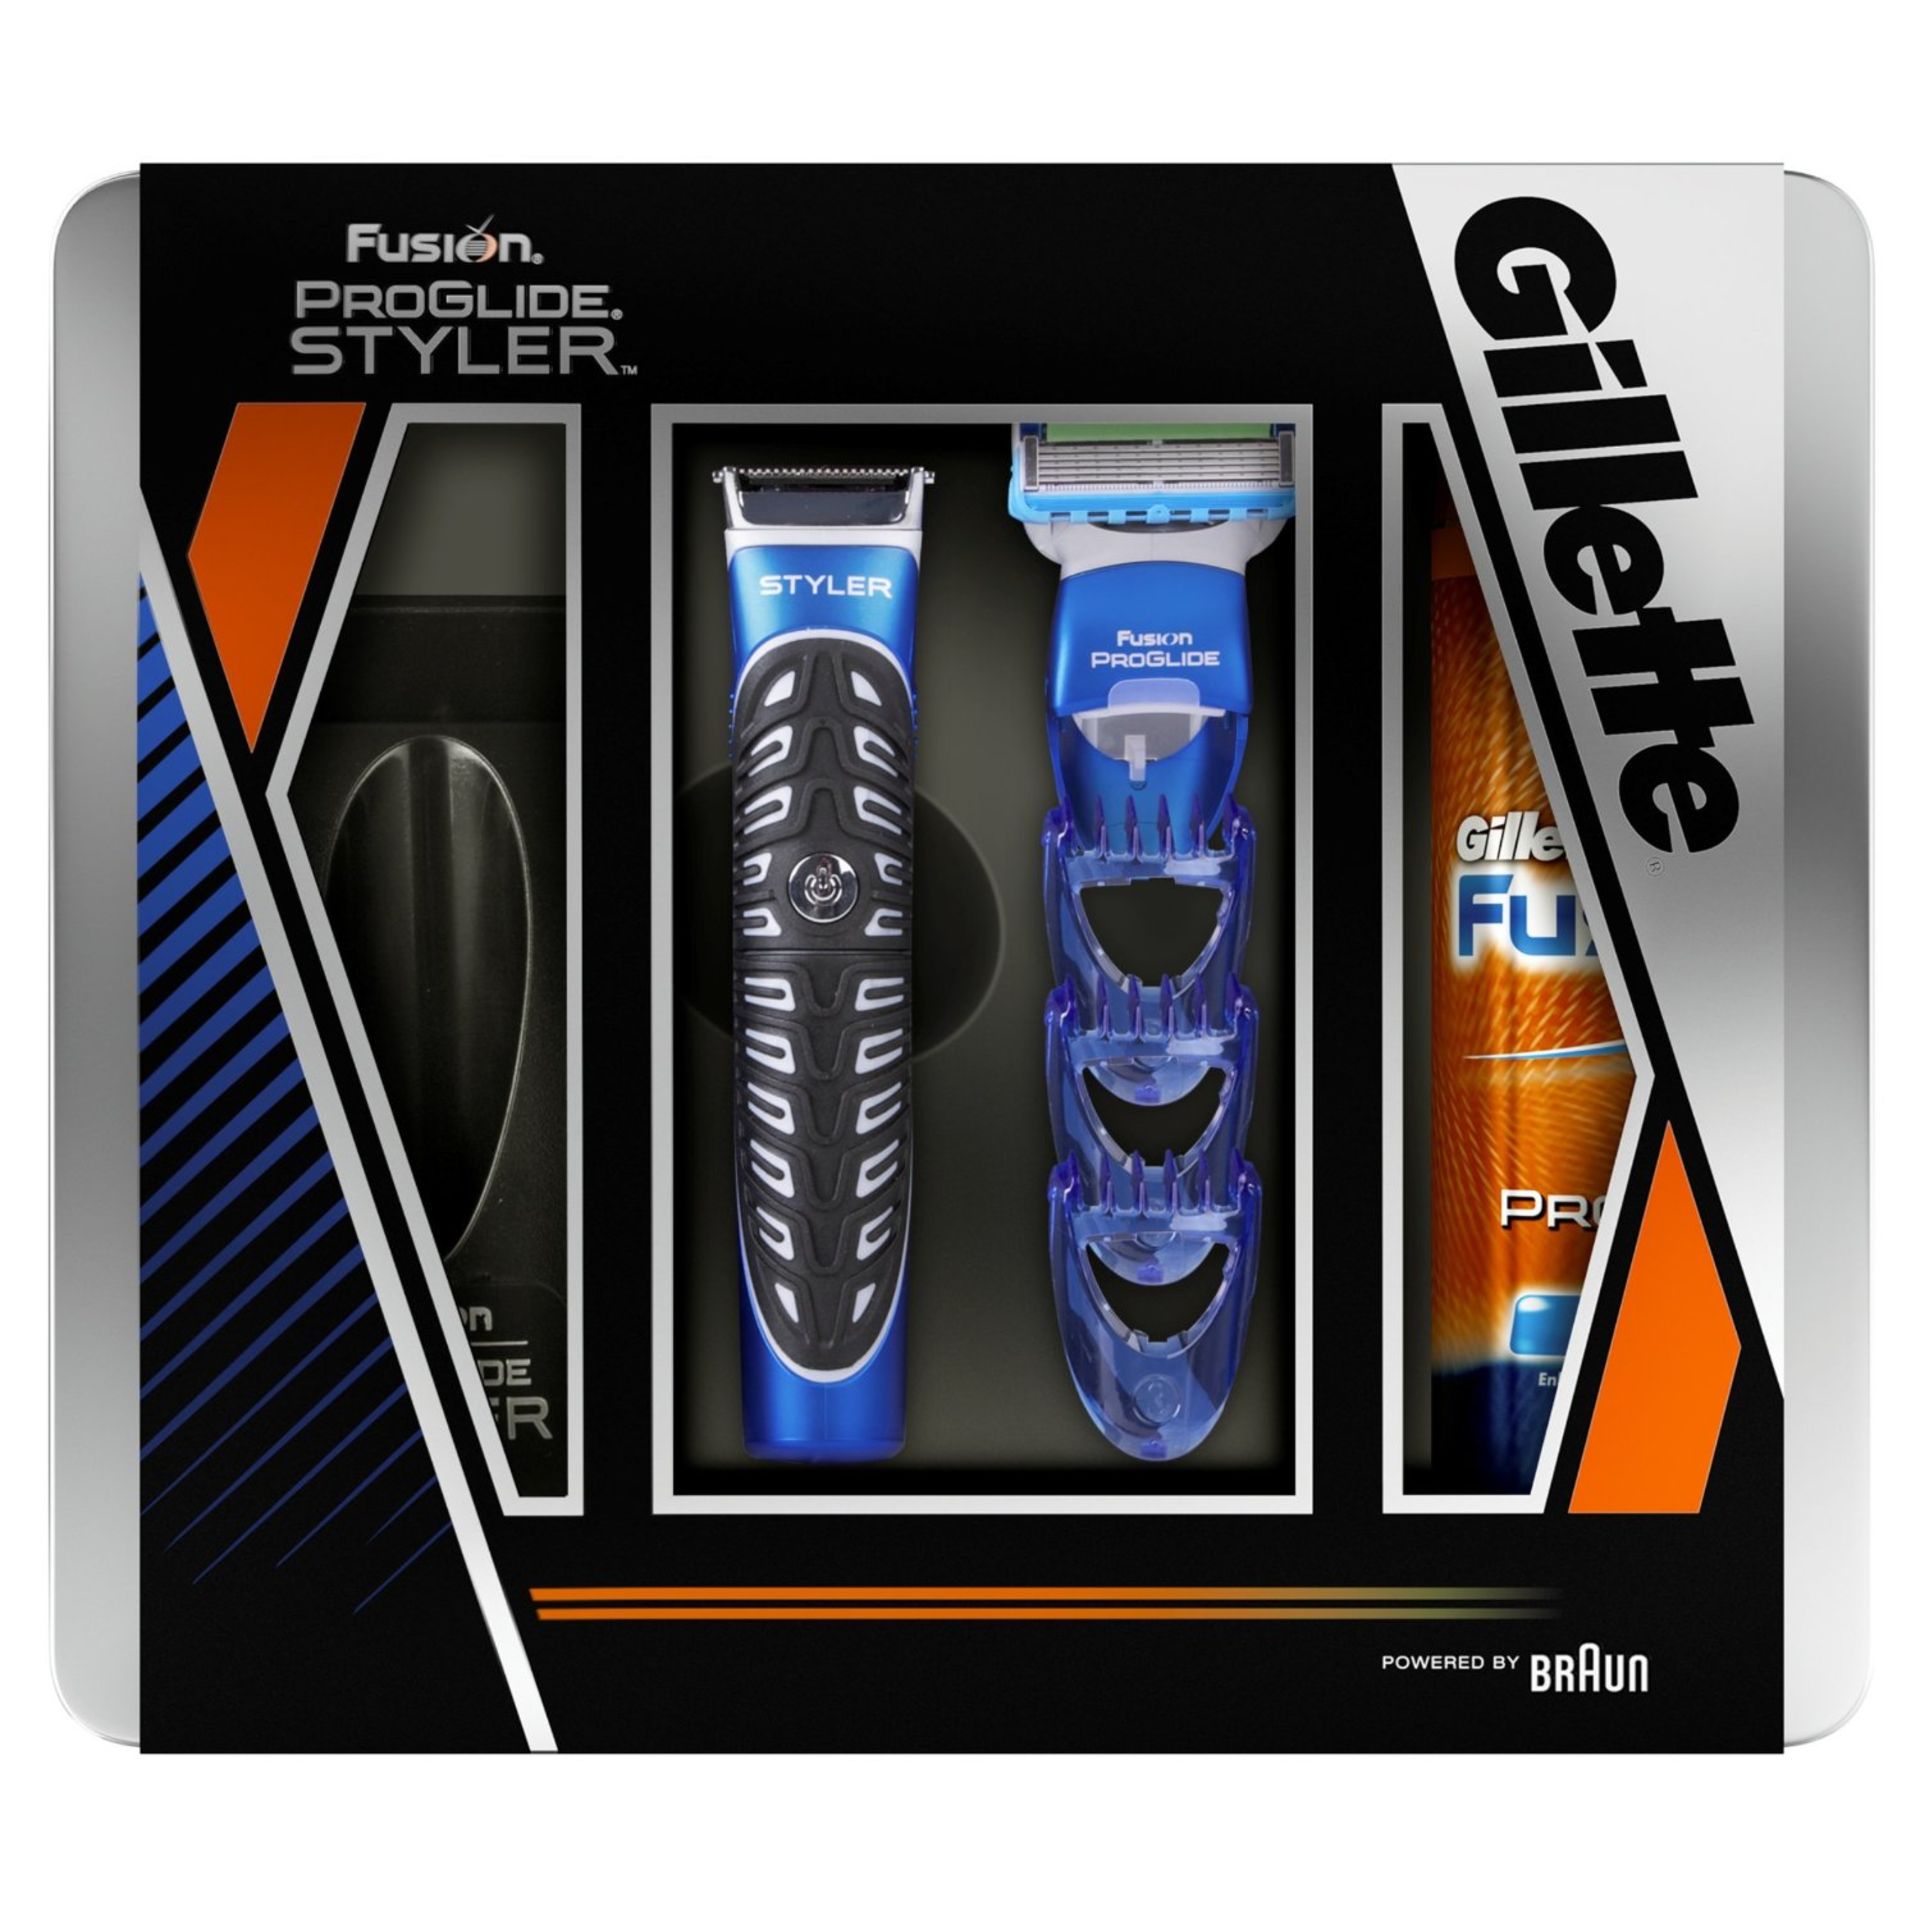 V *TRADE QTY* Brand New Gillette Styler Plus Razor Plus Hydrating Set X 3 YOUR BID PRICE TO BE